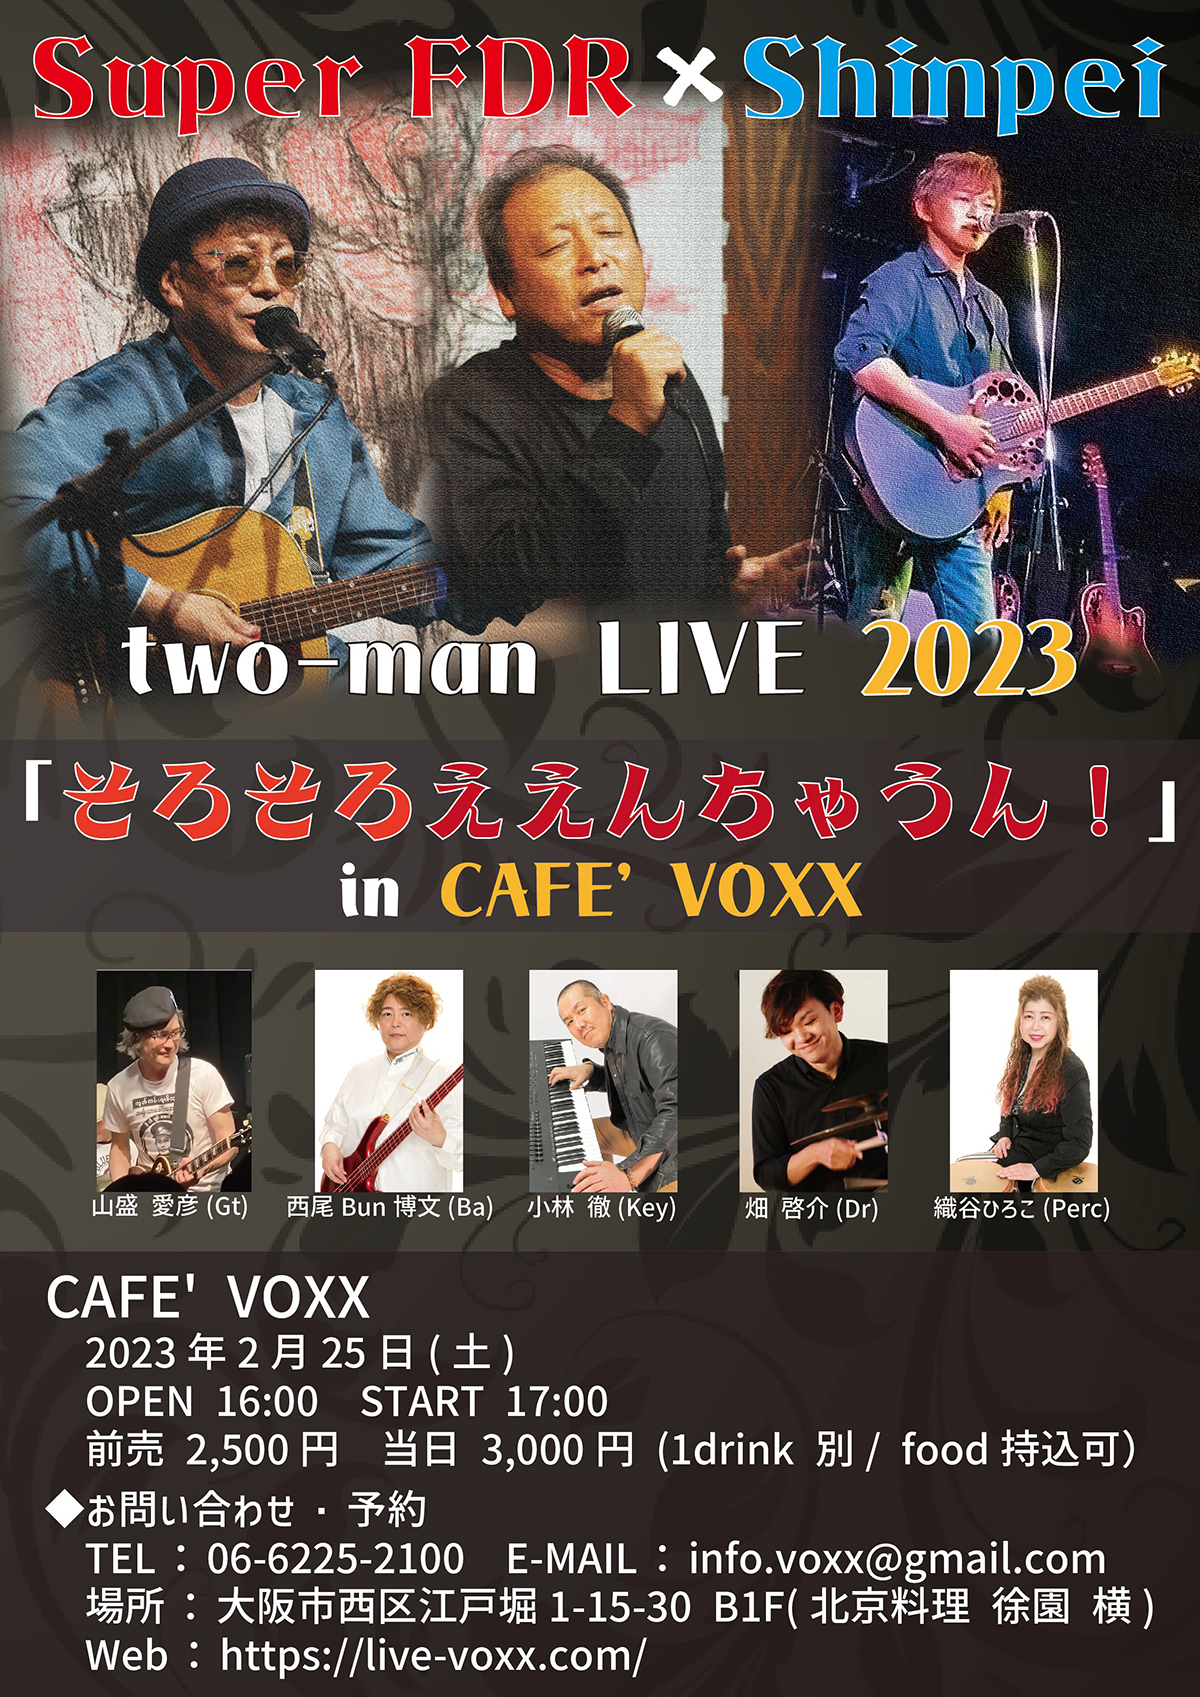 Super FDR × Shinpei two-man LIVE 2023 「そろそろええんちゃうん！」in CAFE’ VOXX